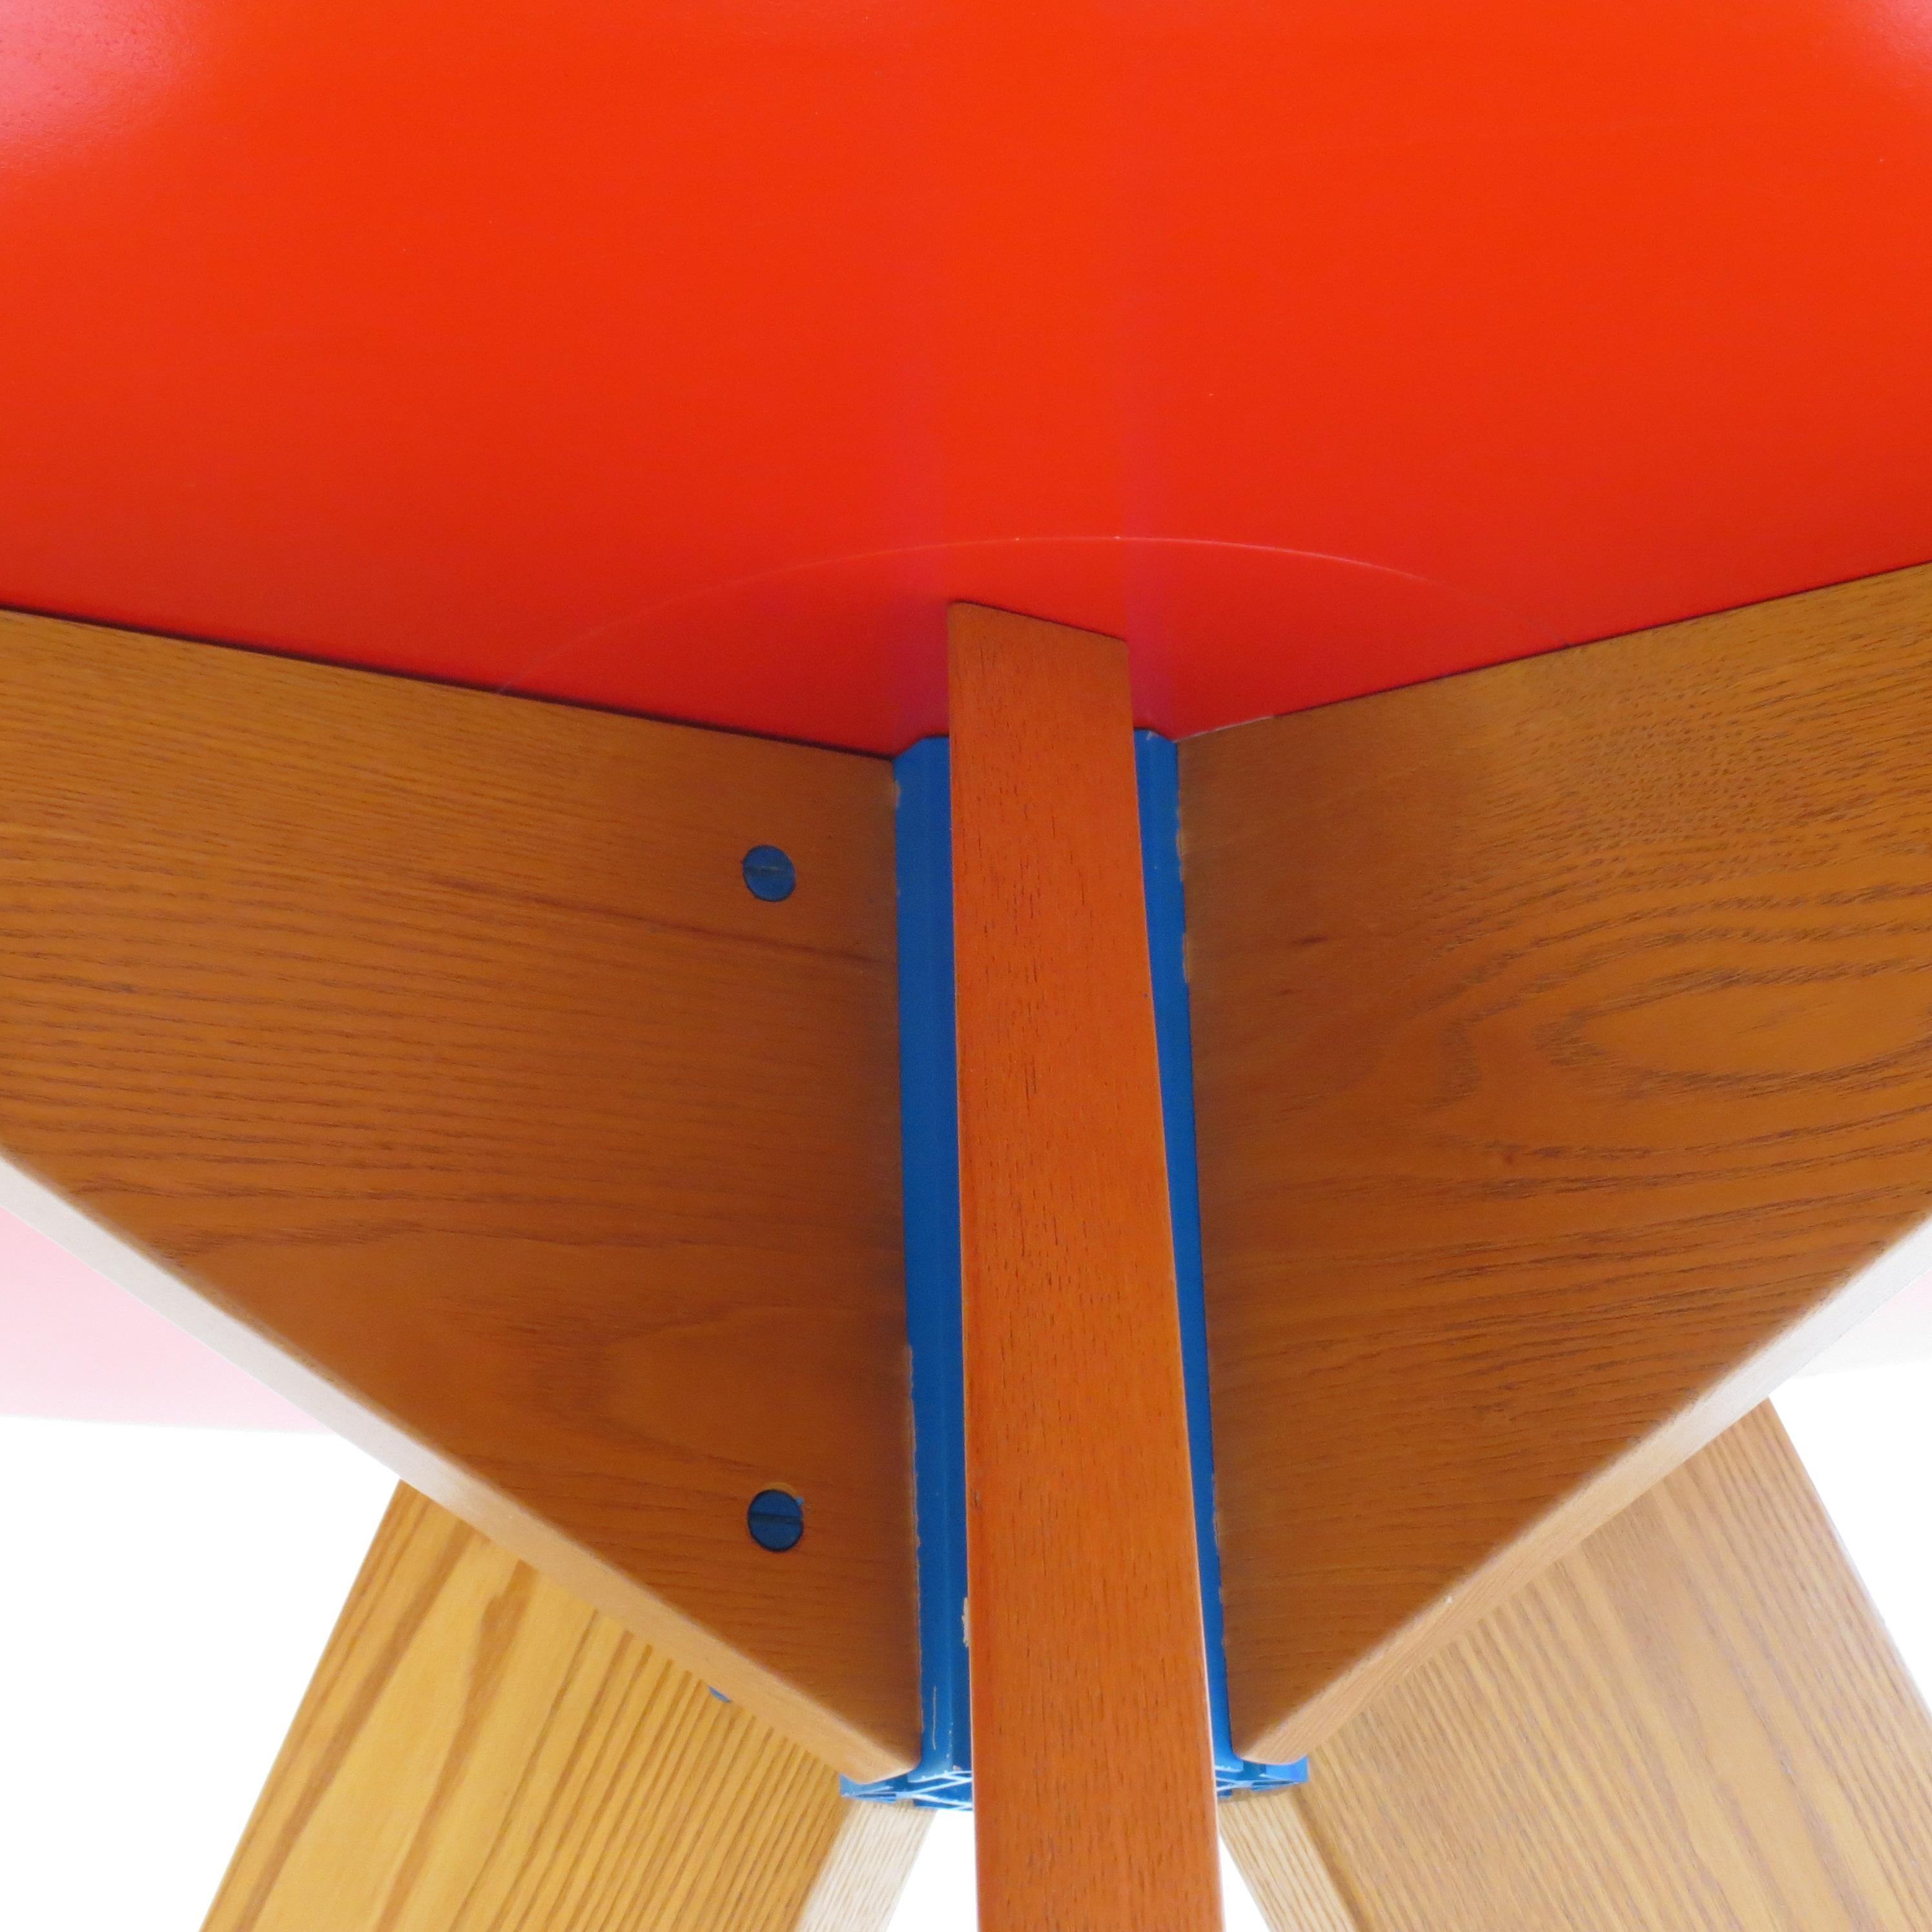 Hand-Crafted Midcentury Bespoke Circular Ash Dining Table by David Field 1980s with Red Blue